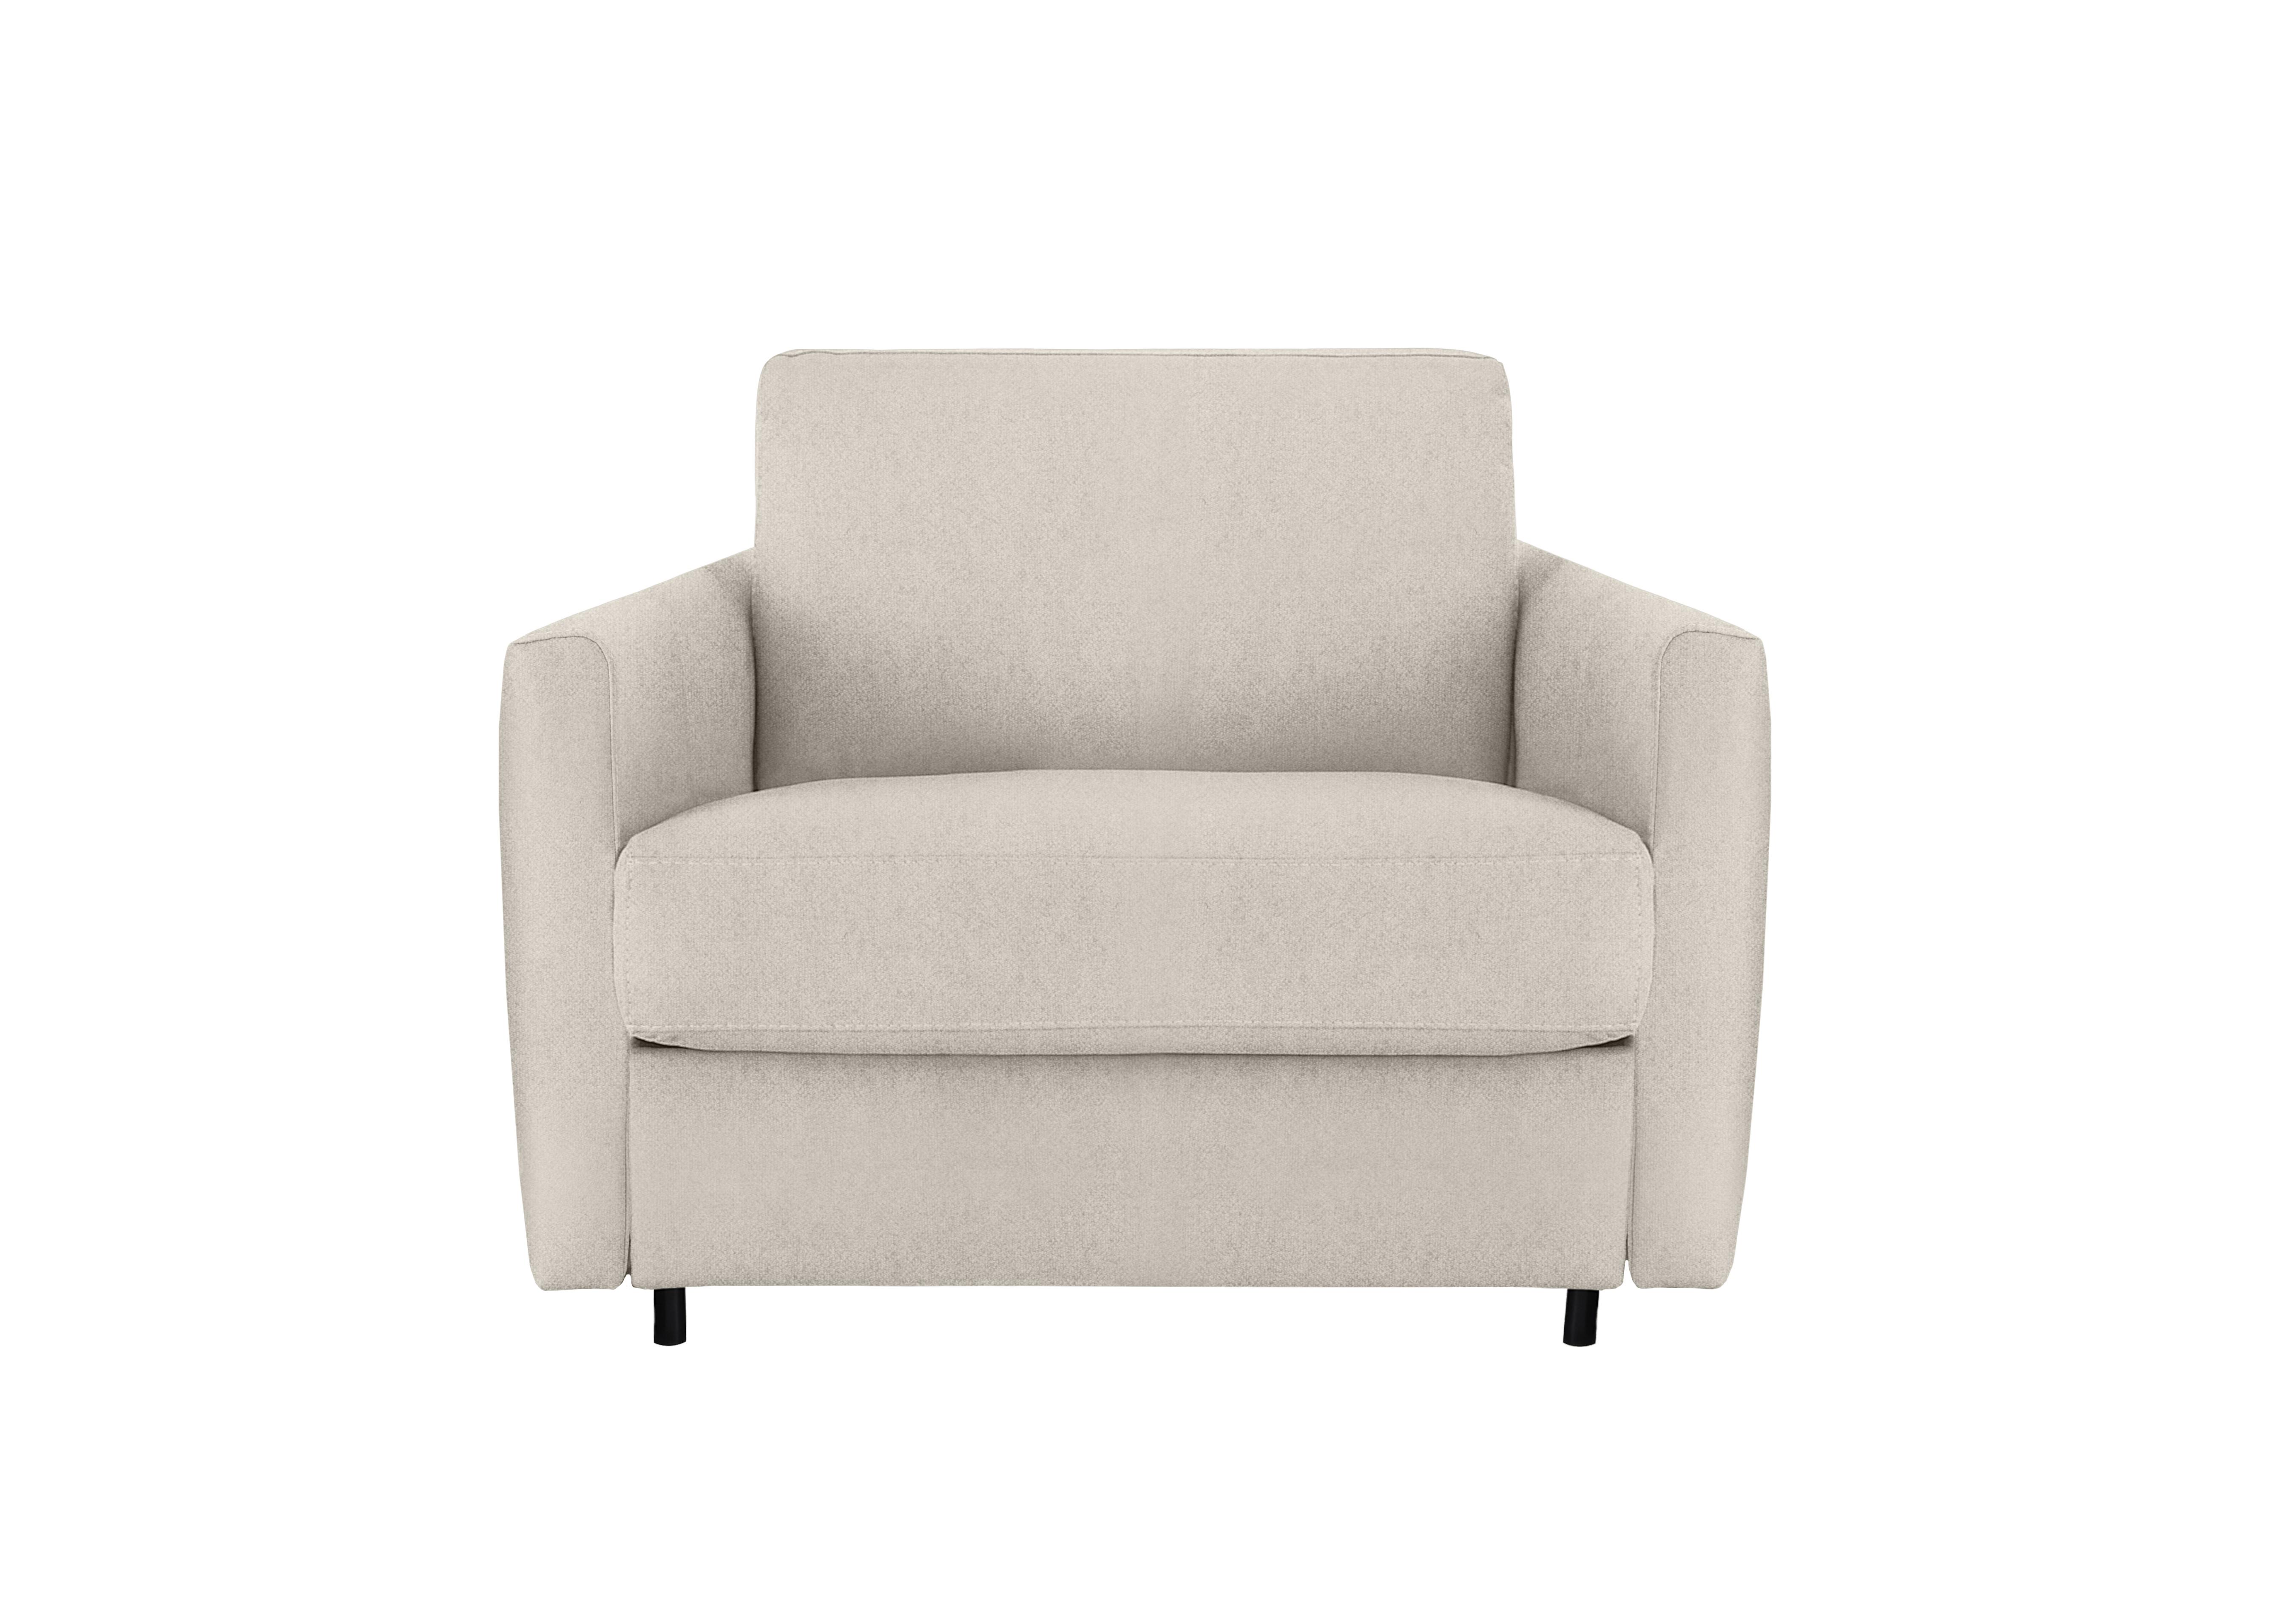 Alcova Fabric Chair Sofa Bed with Slim Arms in Fuente Beige on Furniture Village